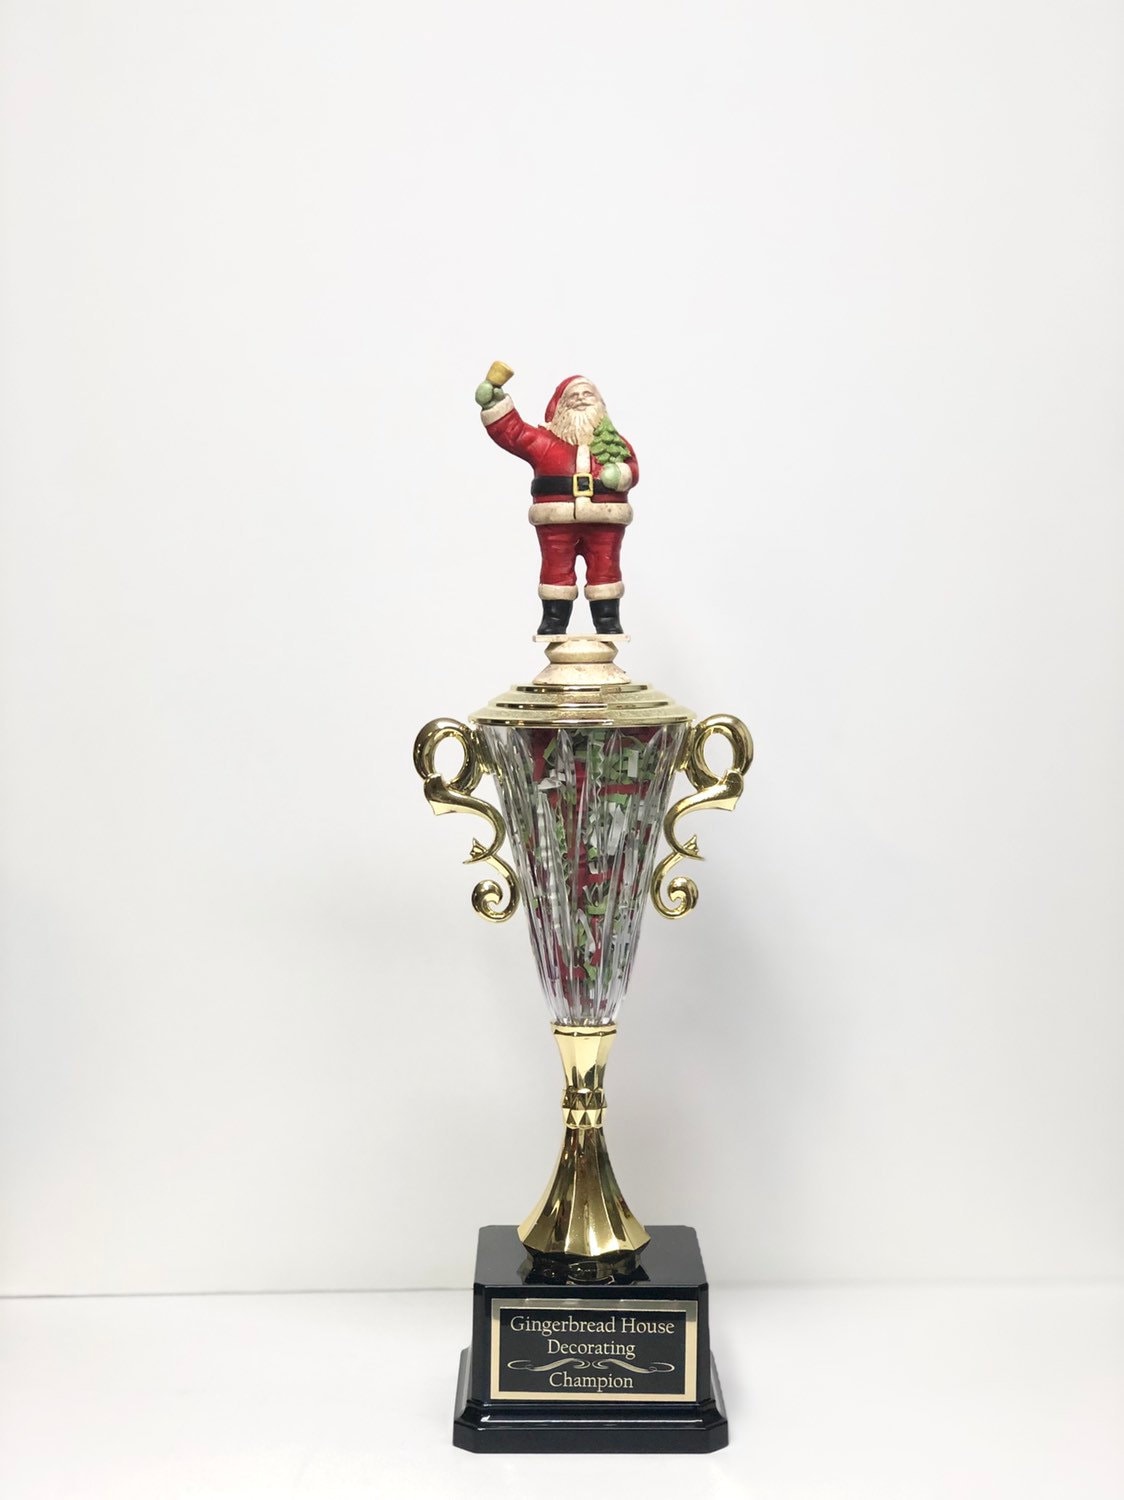 Gingerbread Decorating Cookie Bake Off Trophy Ugly Sweater Contest Trophy Santa Family Christmas Party Trivia Night Trophy Christmas Decor